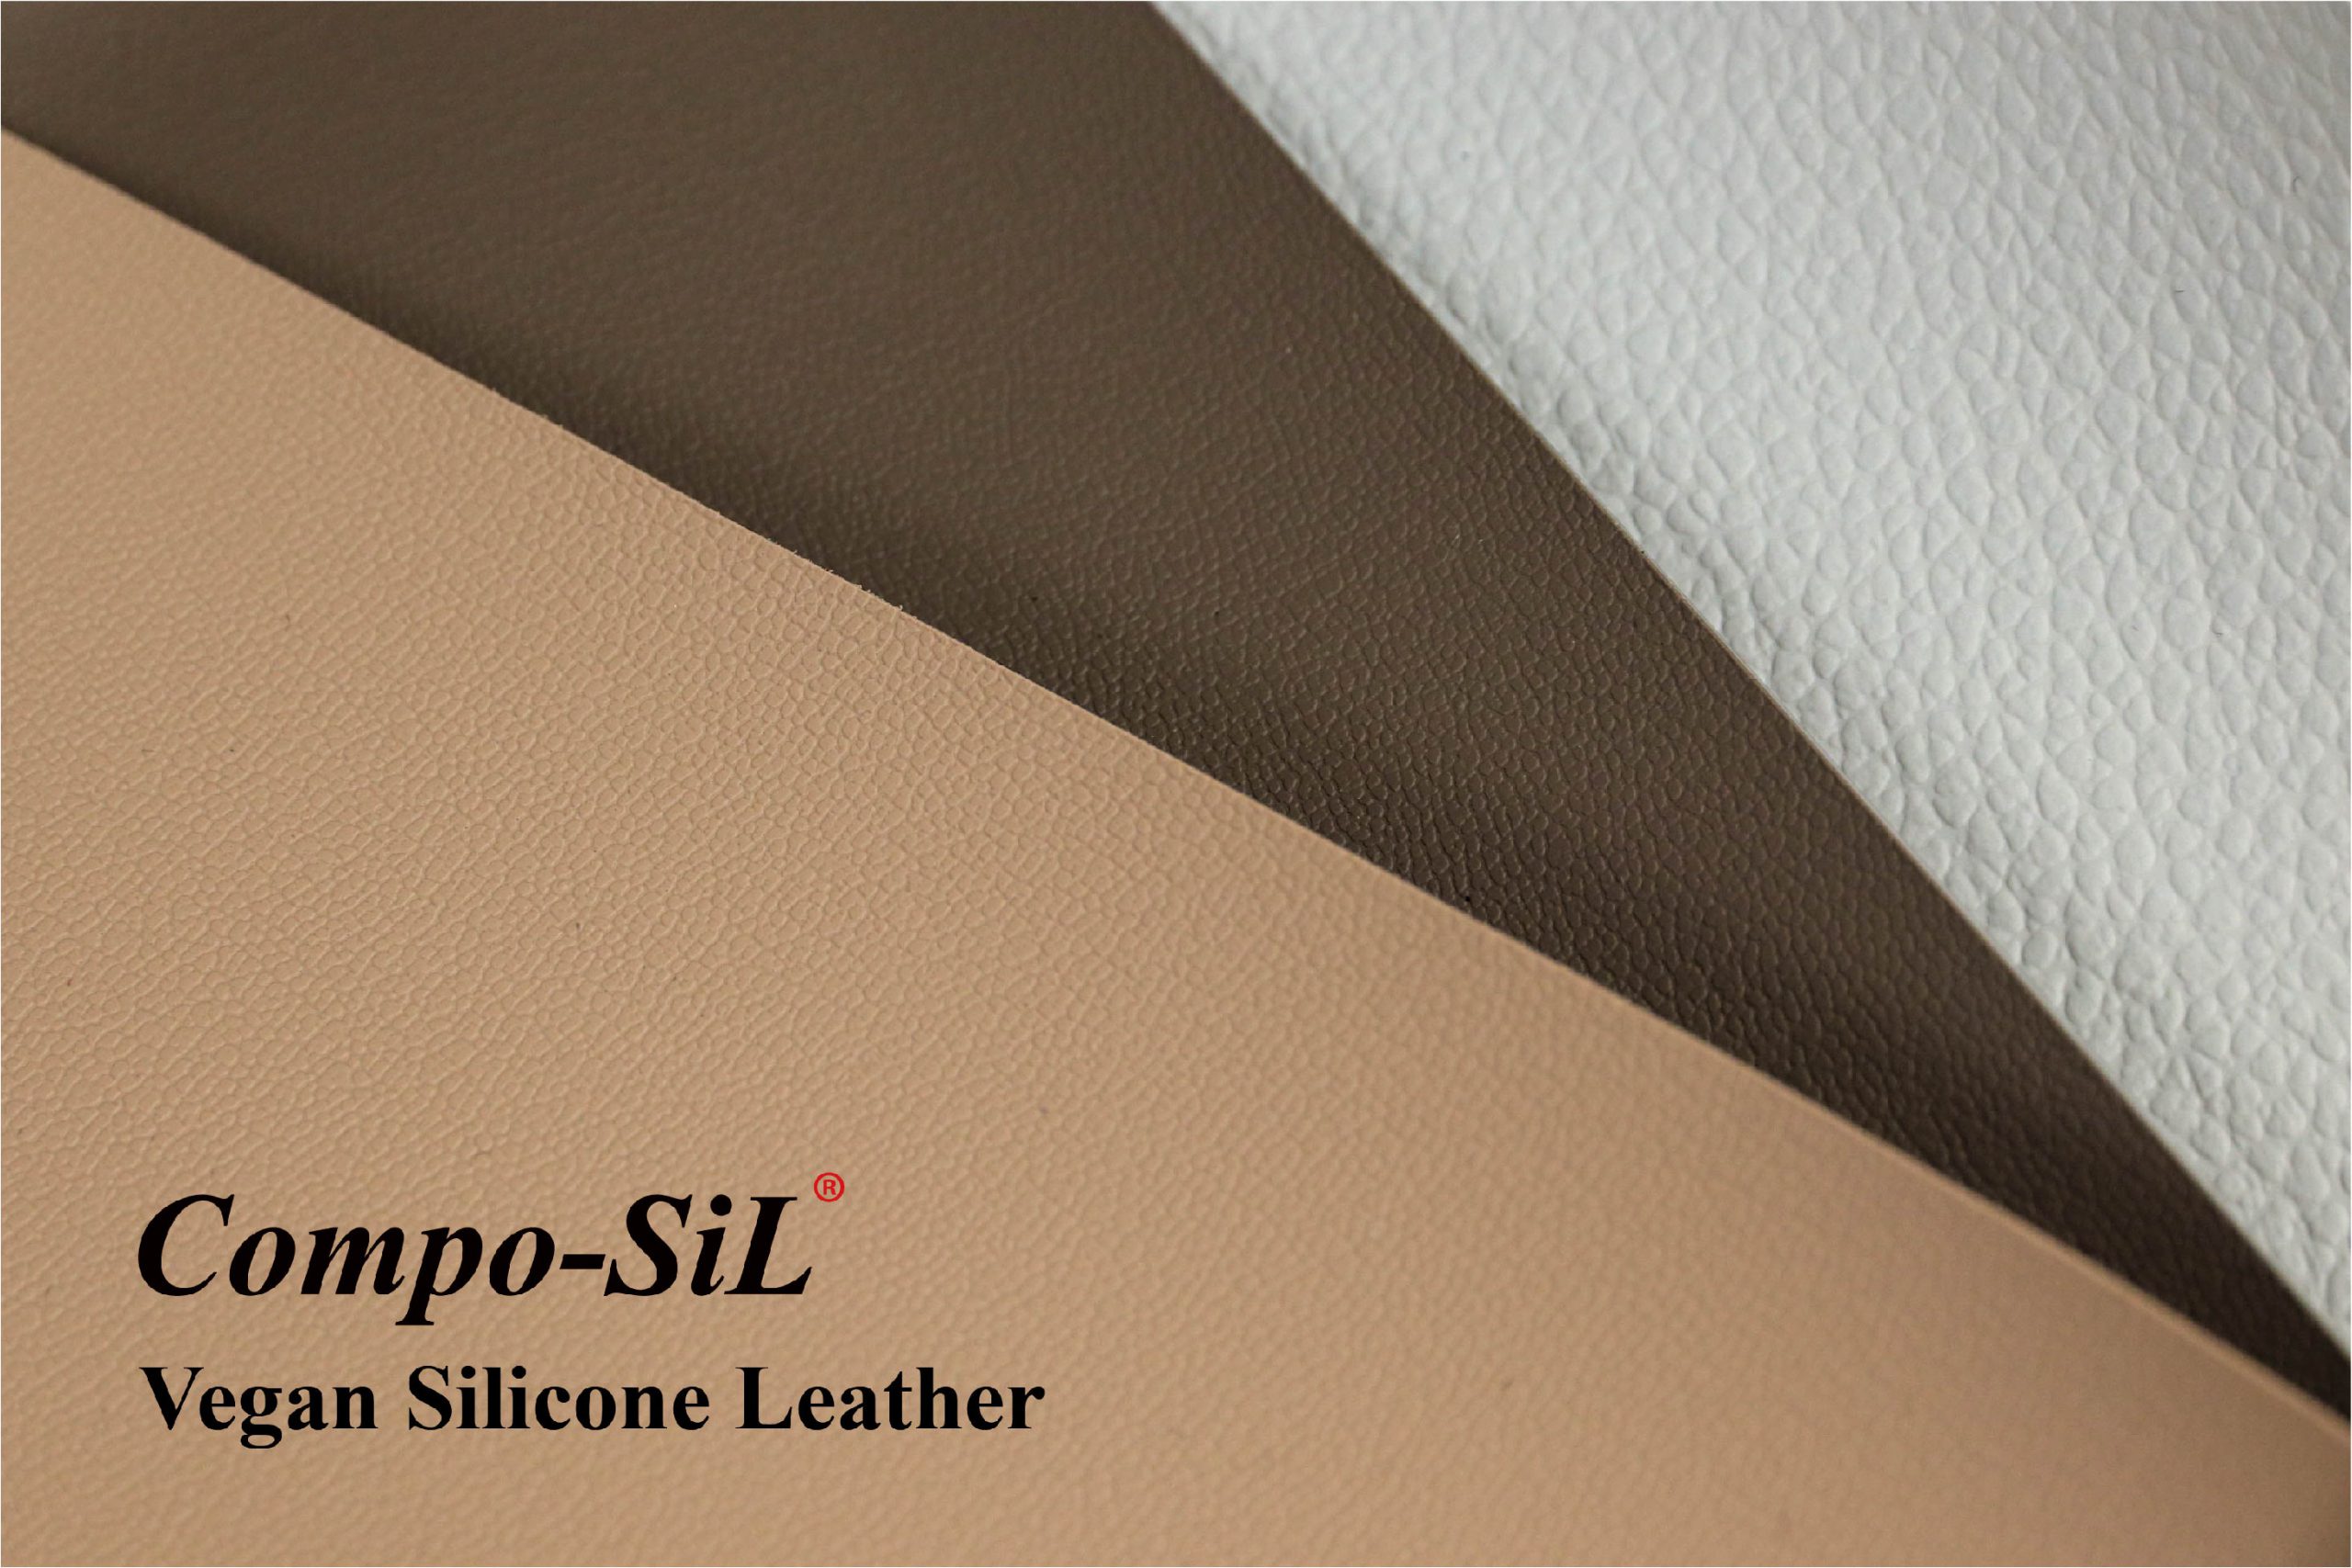 Compo-SiL®, the Best Vegan Leather Fabric for Unlimited Textile and Product Design Freedom